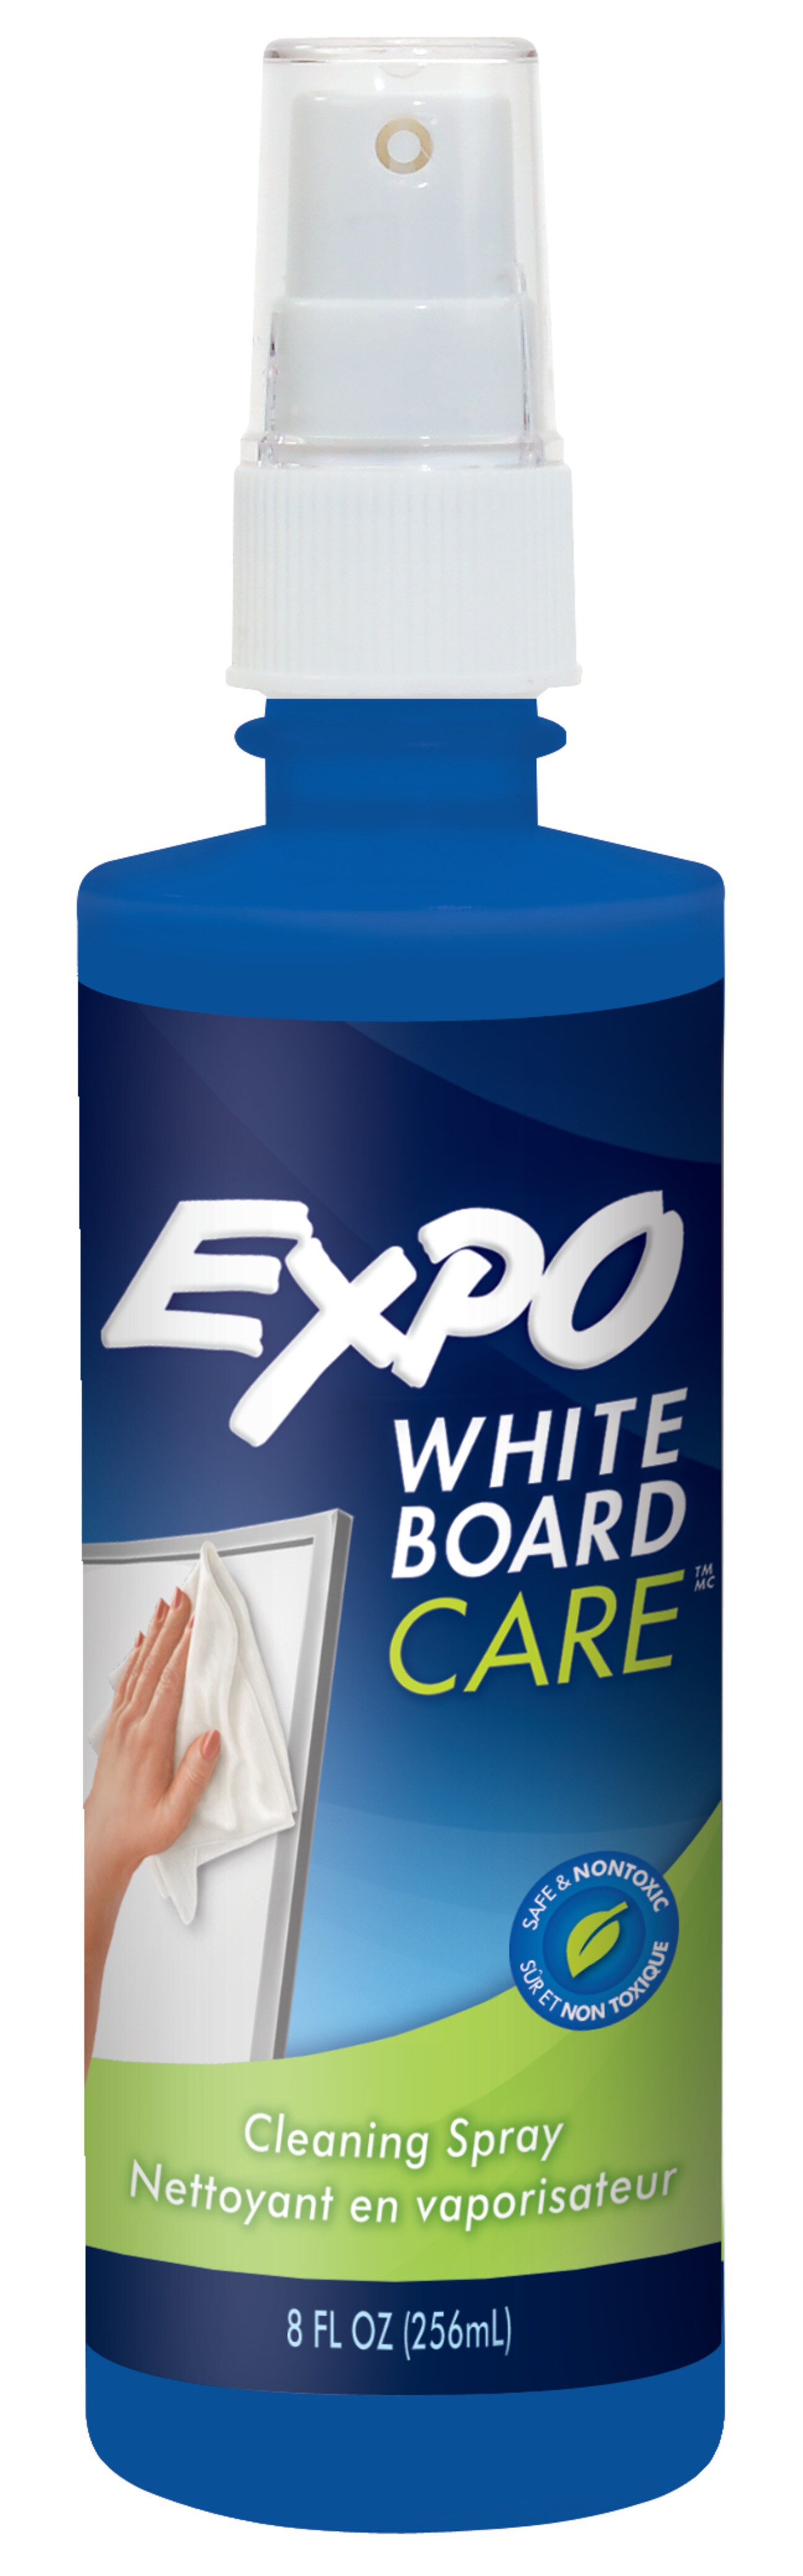 Board Cleaning Kit - Magnetic Eraser with Spray Cleaner - White